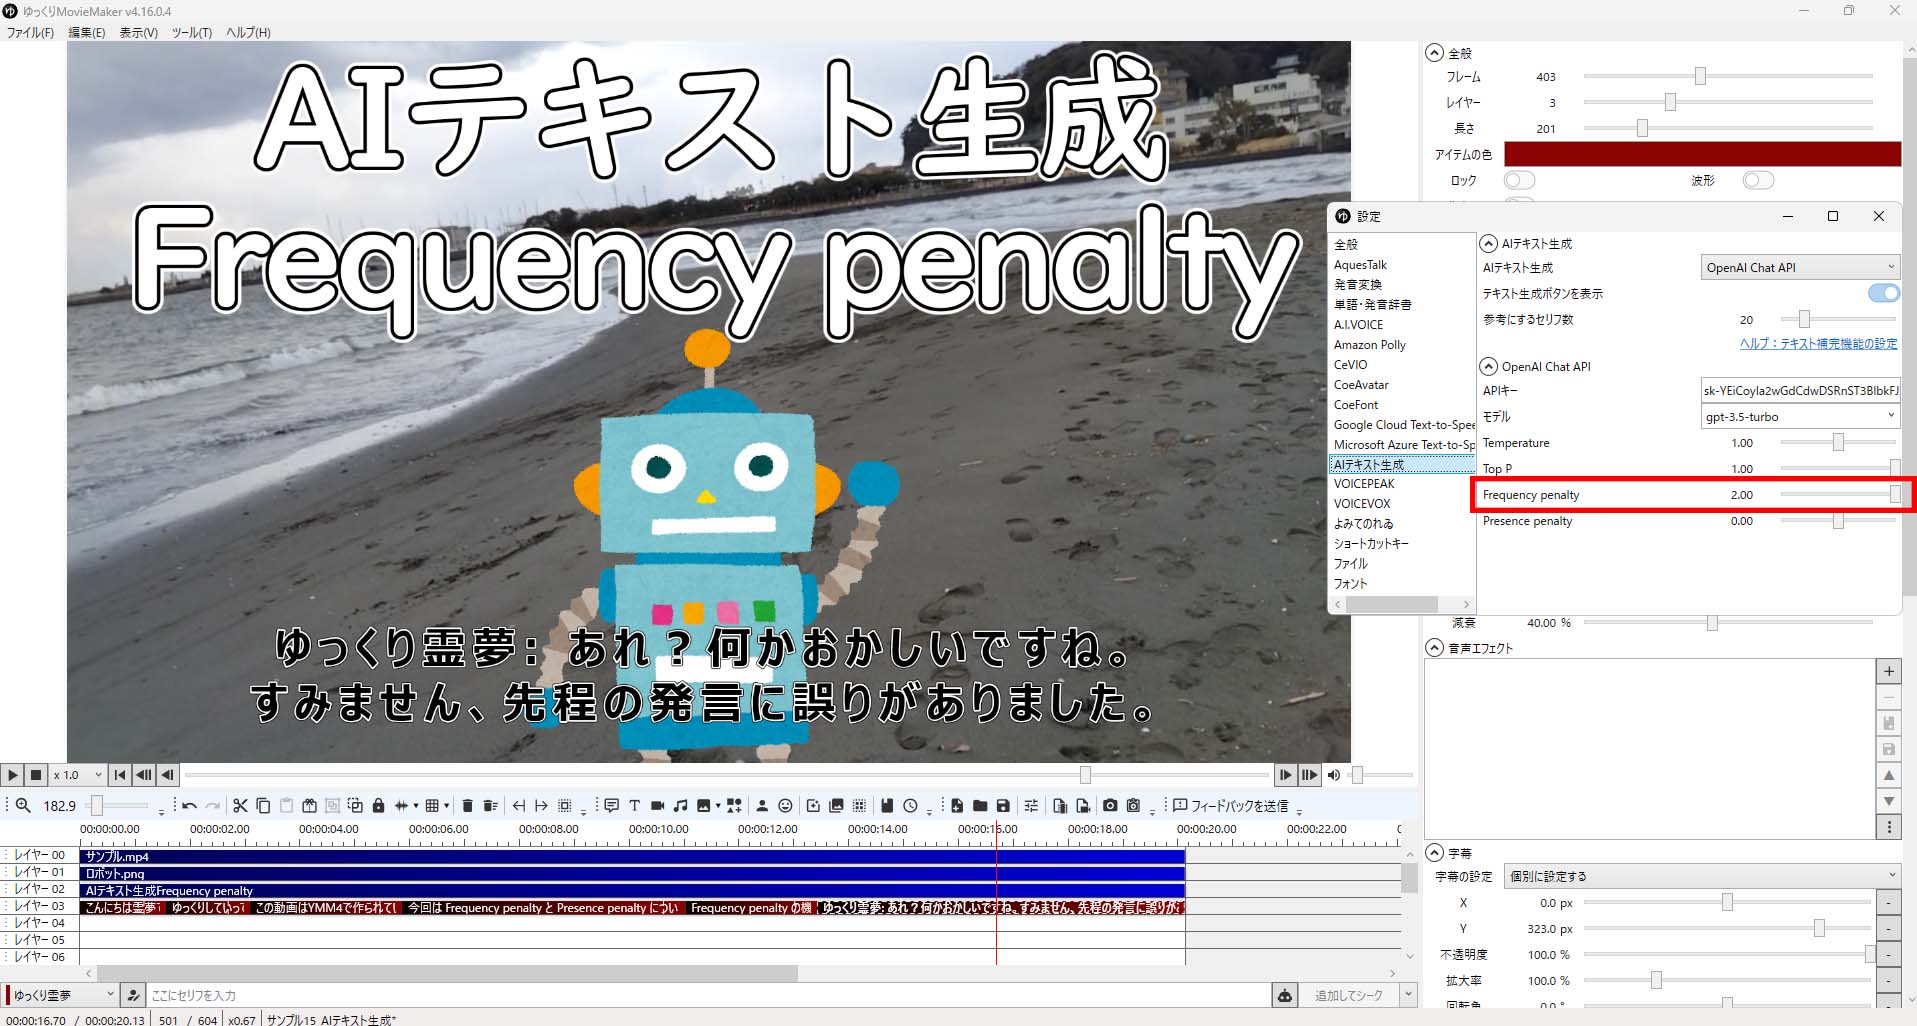 AIテキスト生成_Frequency penalty_
2.0